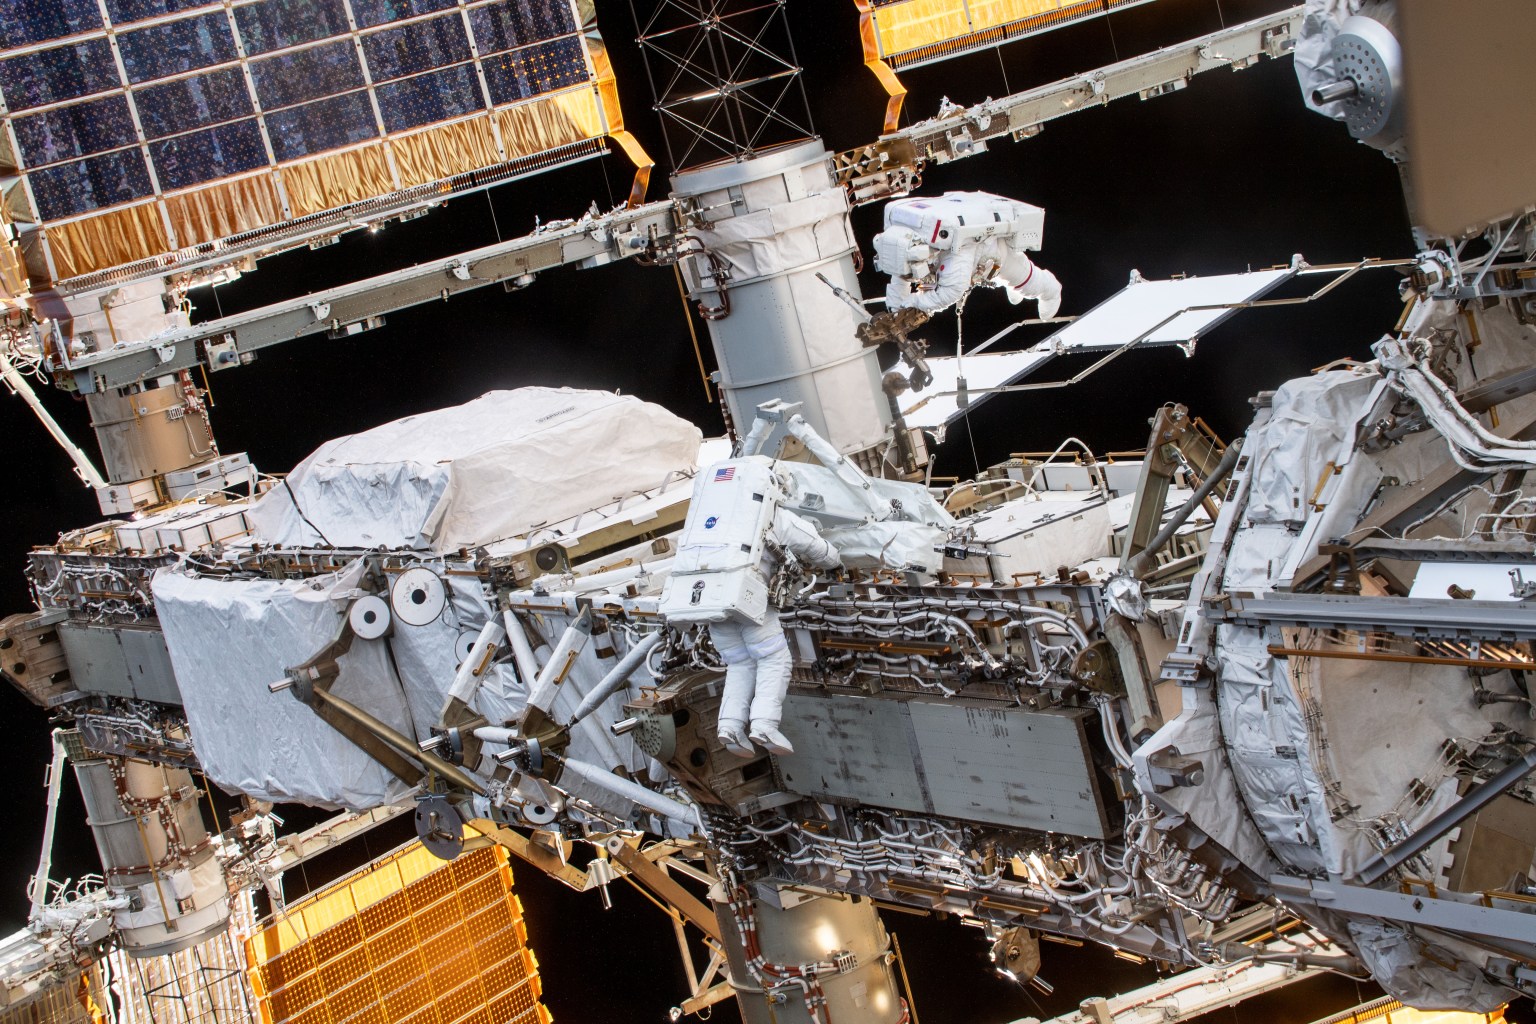 Spacewalkers Thomas Pesquet of ESA (European Space Agency) and Akihiko Hoshide of JAXA (Japan Aerospace Exploration Agency) set up the 4A channel on the International Space Station's P4 (Port) truss segment for the installation of an roll-out solar array.